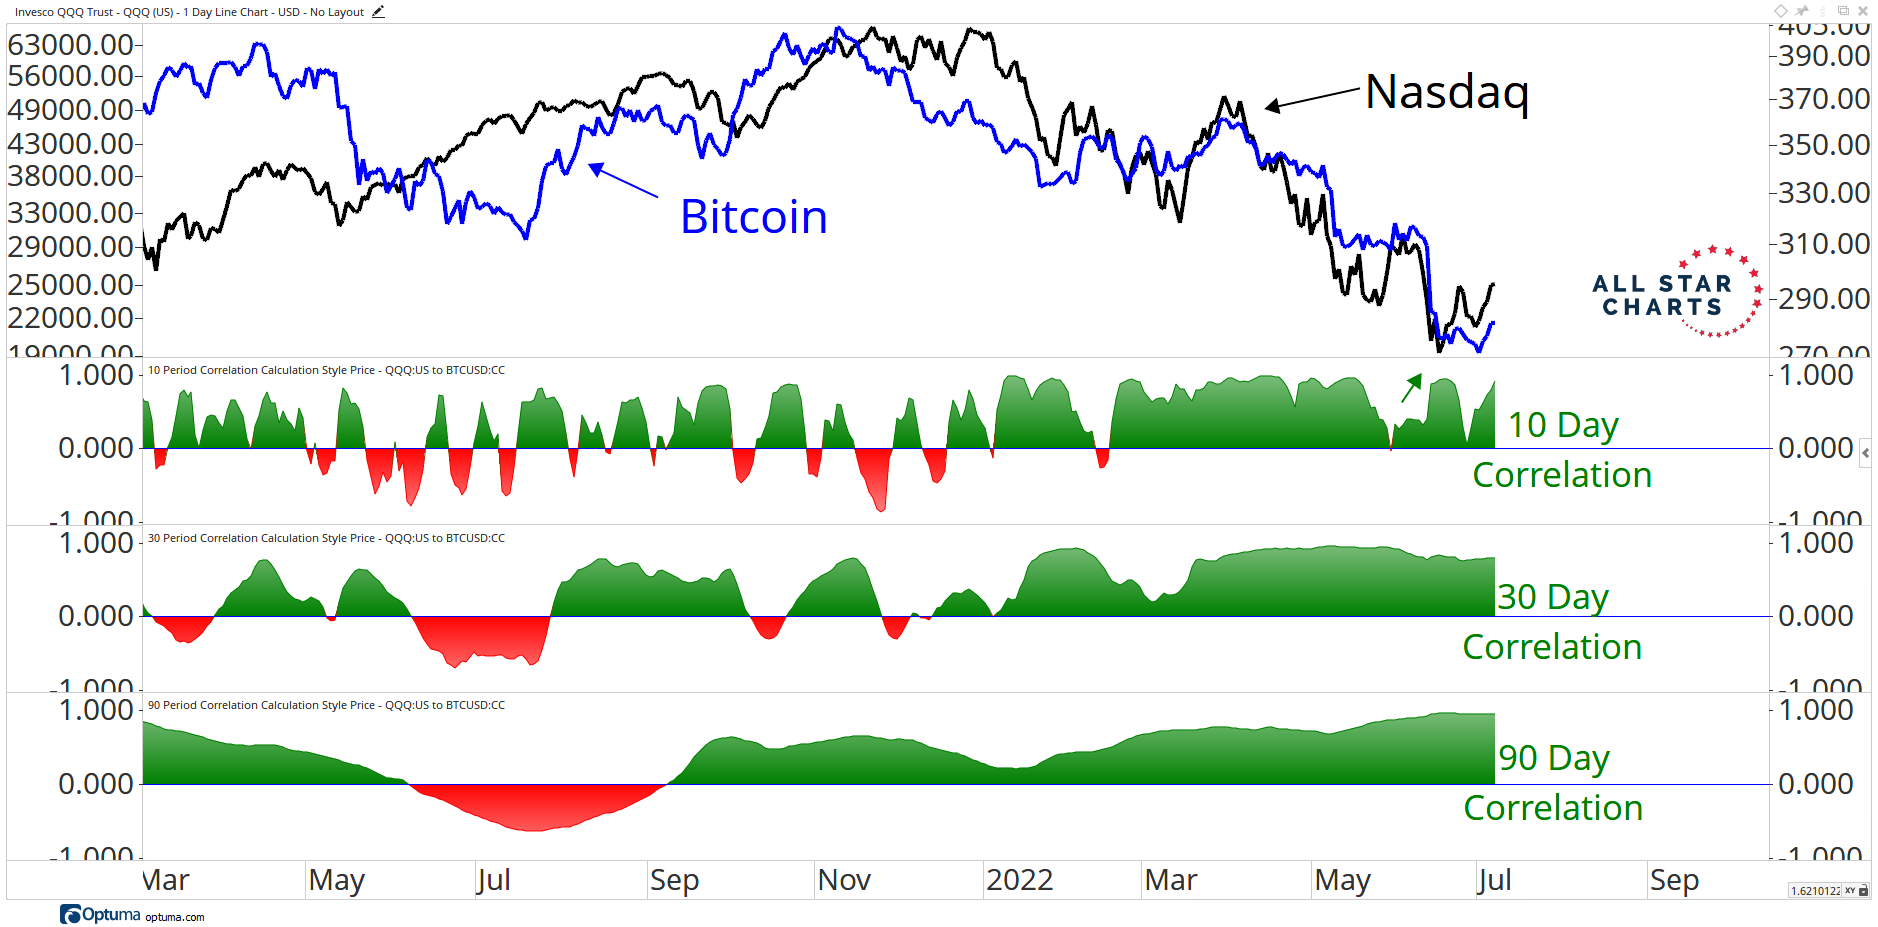 A look at Bitcoin price moves vs QQQ. Looks pretty correlated to